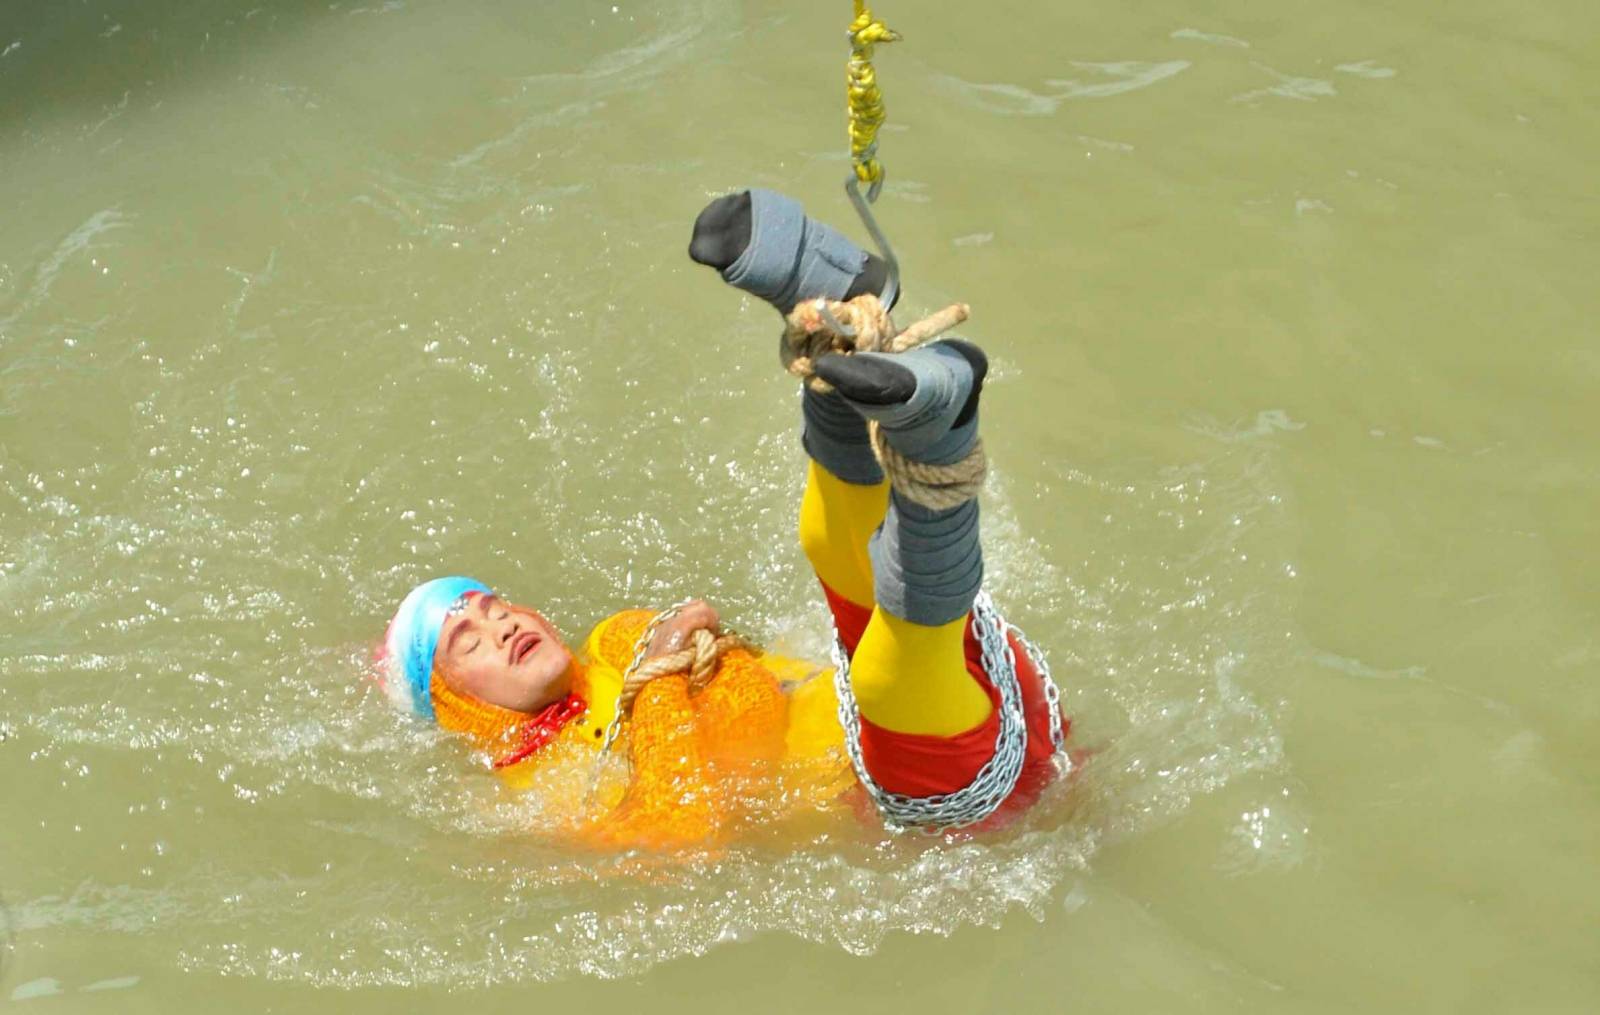 Chanchal Lahiri, a magician, is lowered into the Hooghly river as he performs one of his tricks in Kolkata